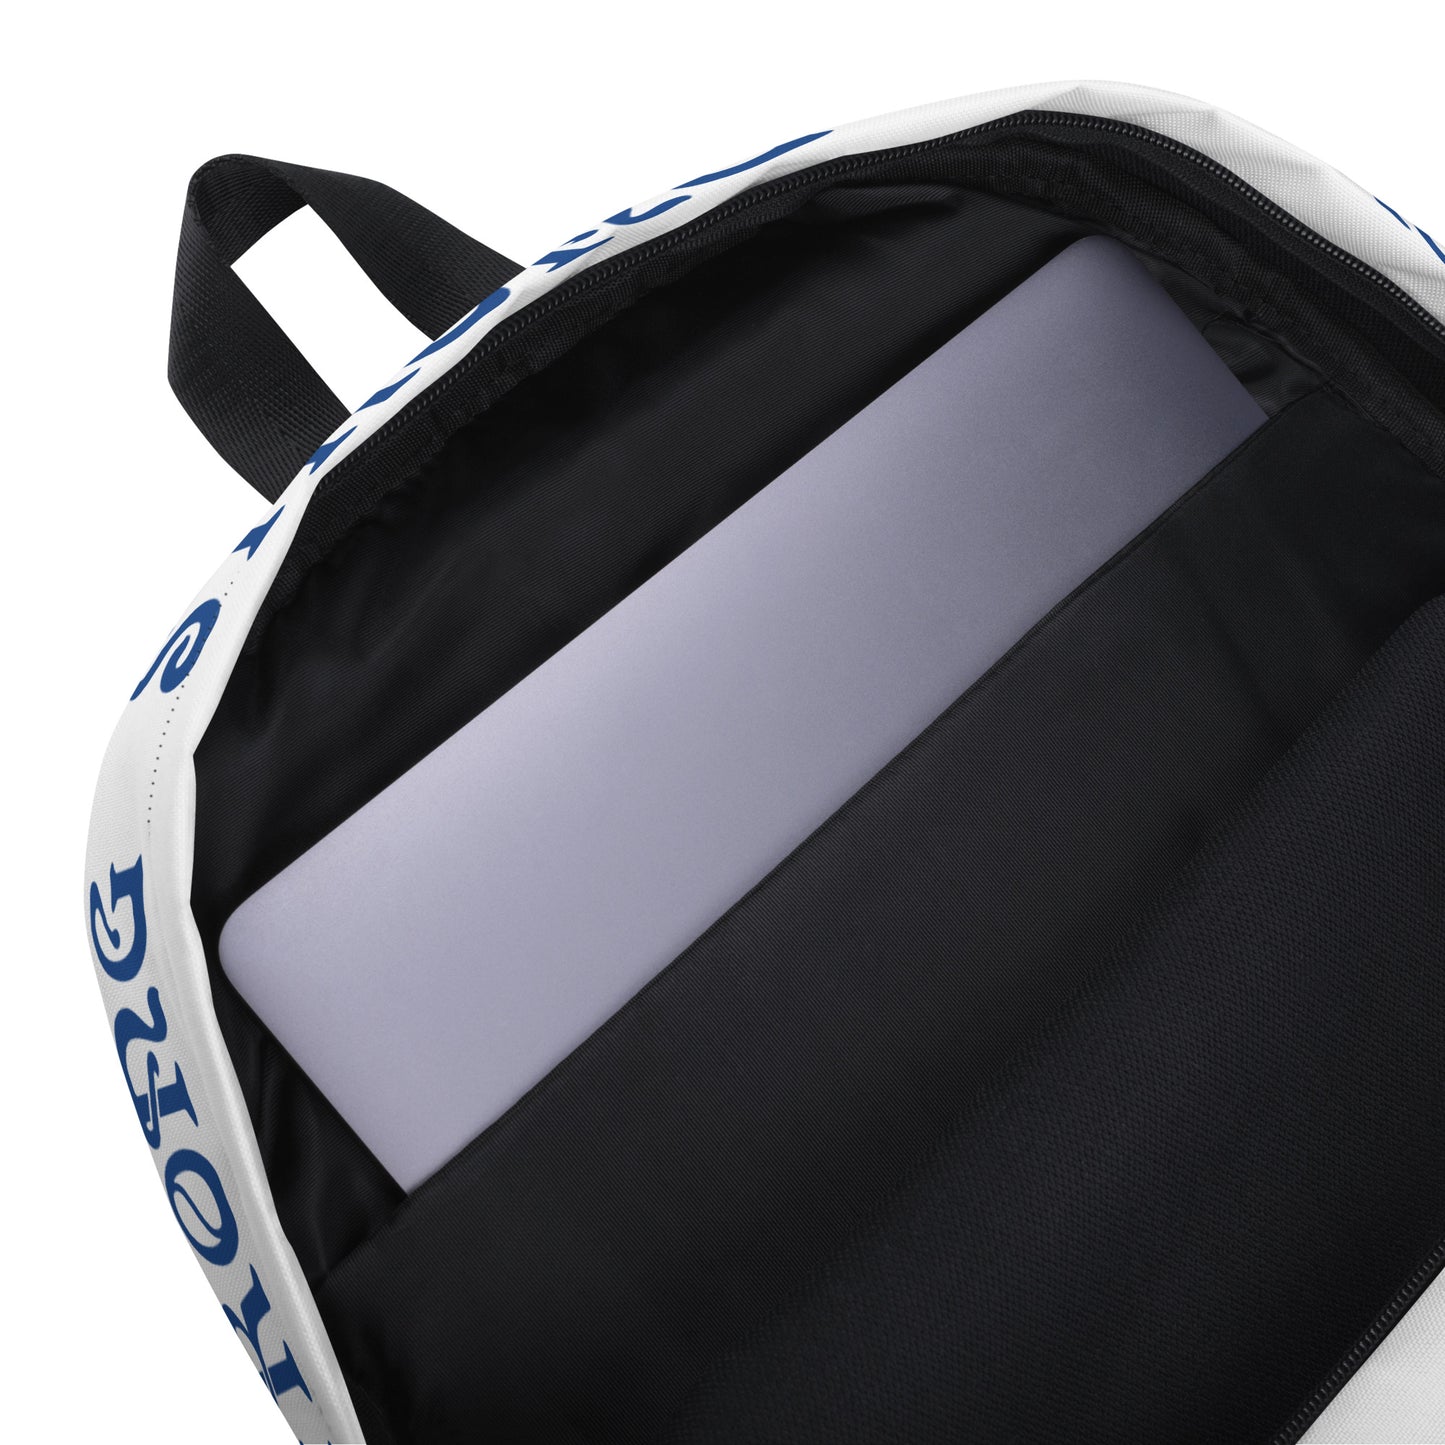 “STRONG” White Backpack W/Blue Font